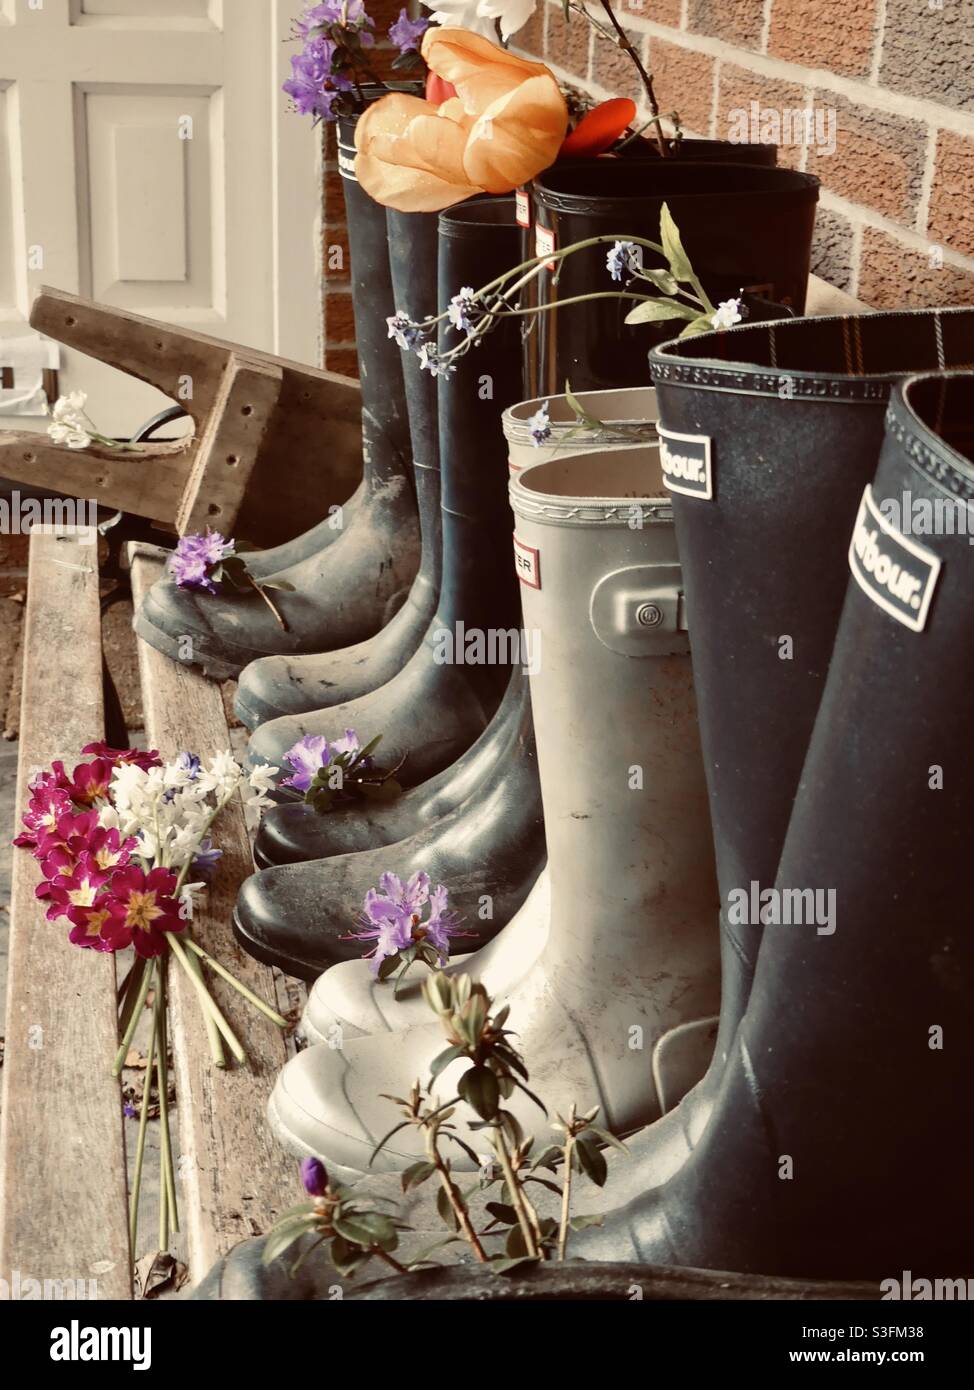 Love ?wellies on a rainy day ☔️⛈? Stock Photo